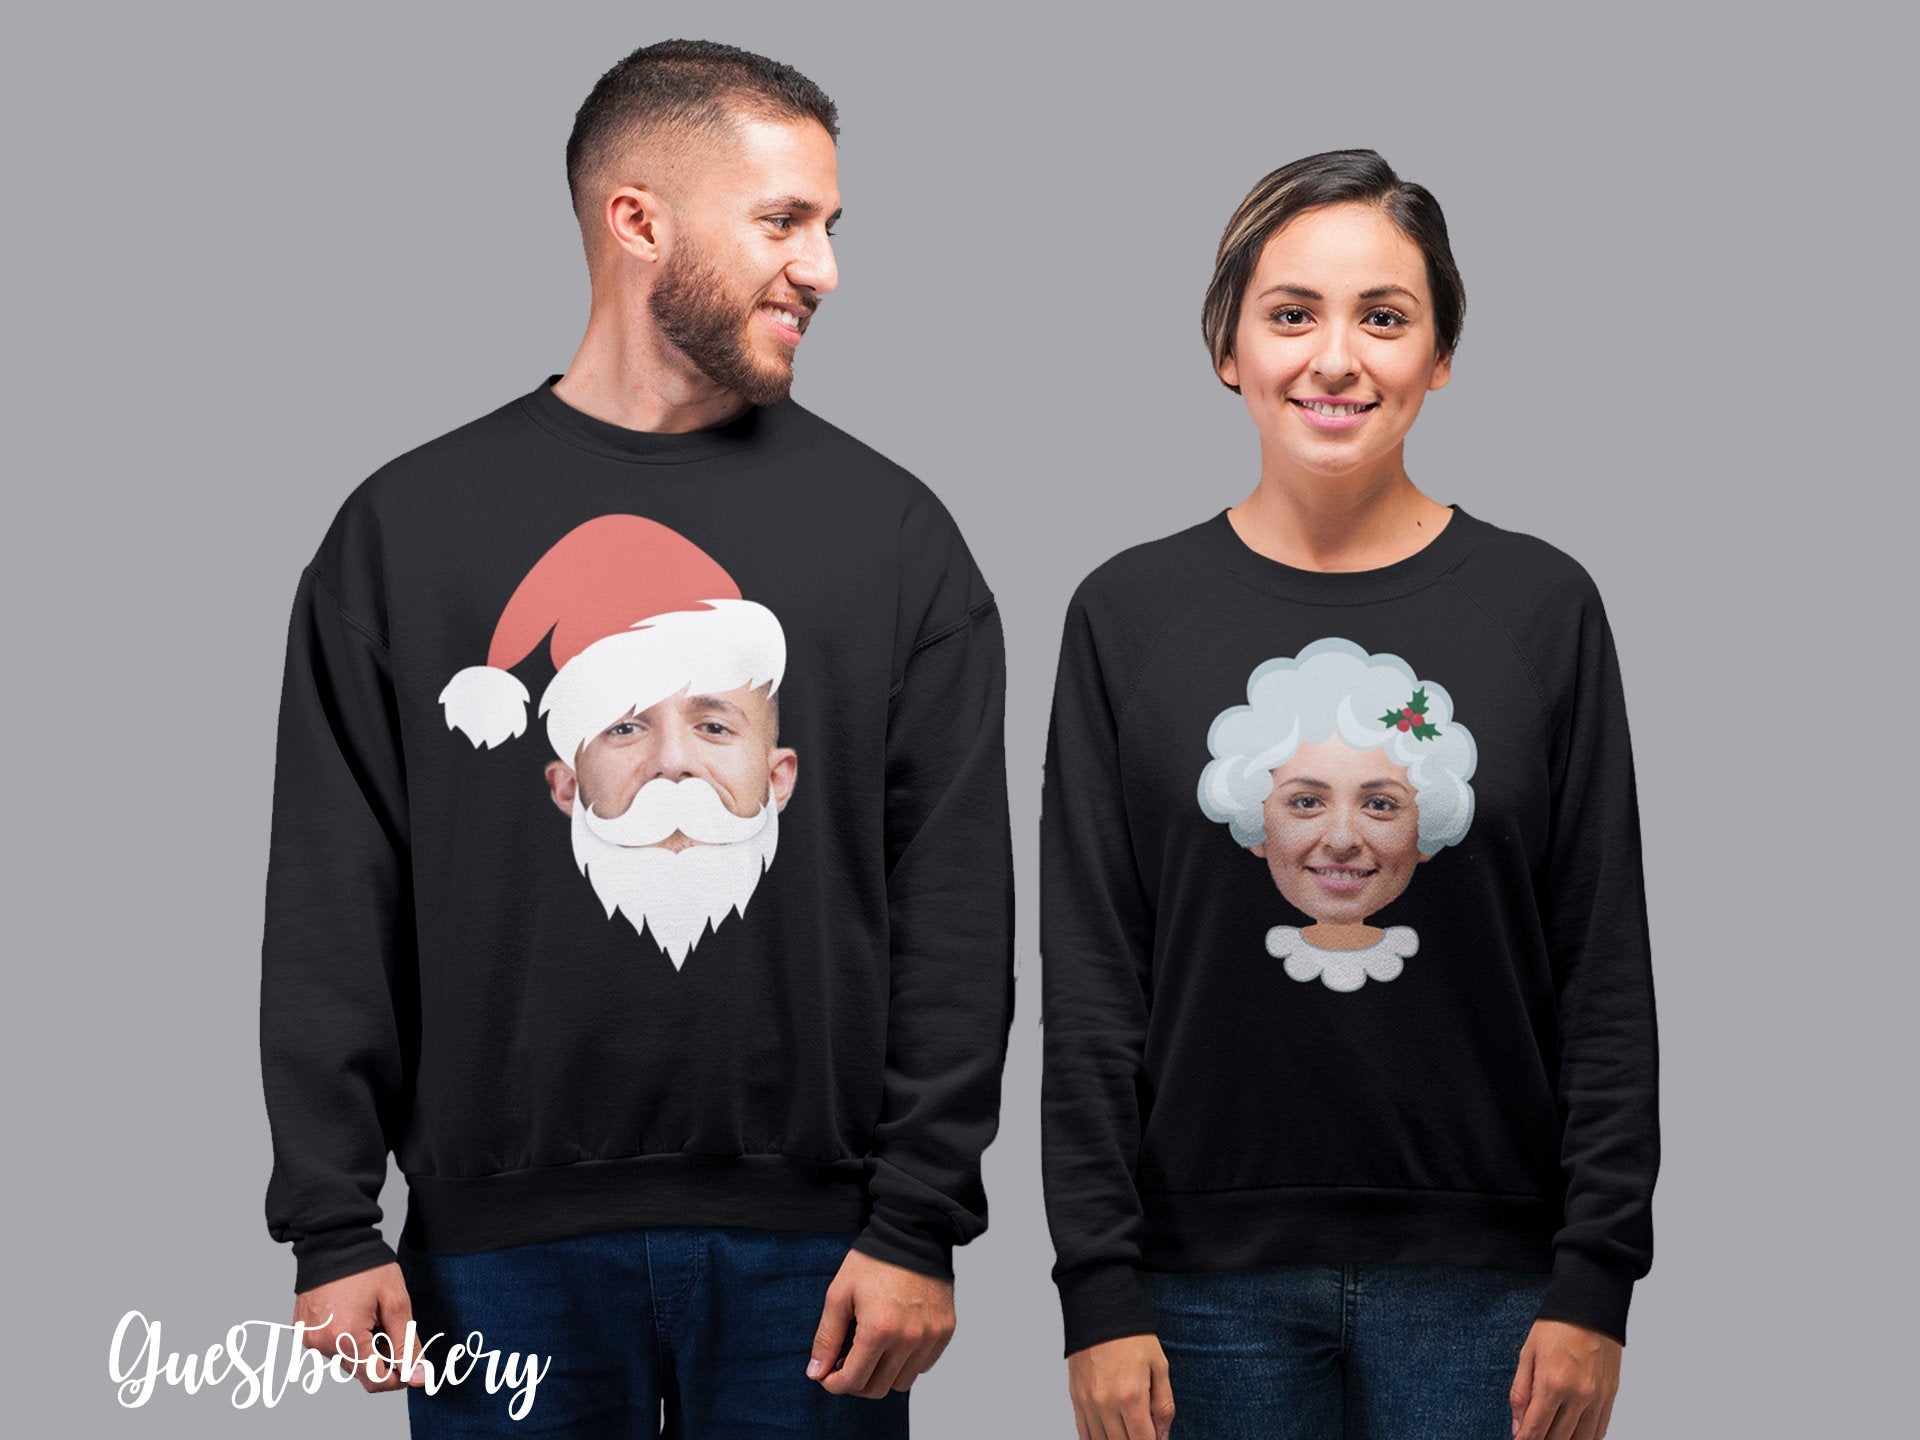 Custom Faces Mr. & Mrs. Claus Hoodies - Guestbookery